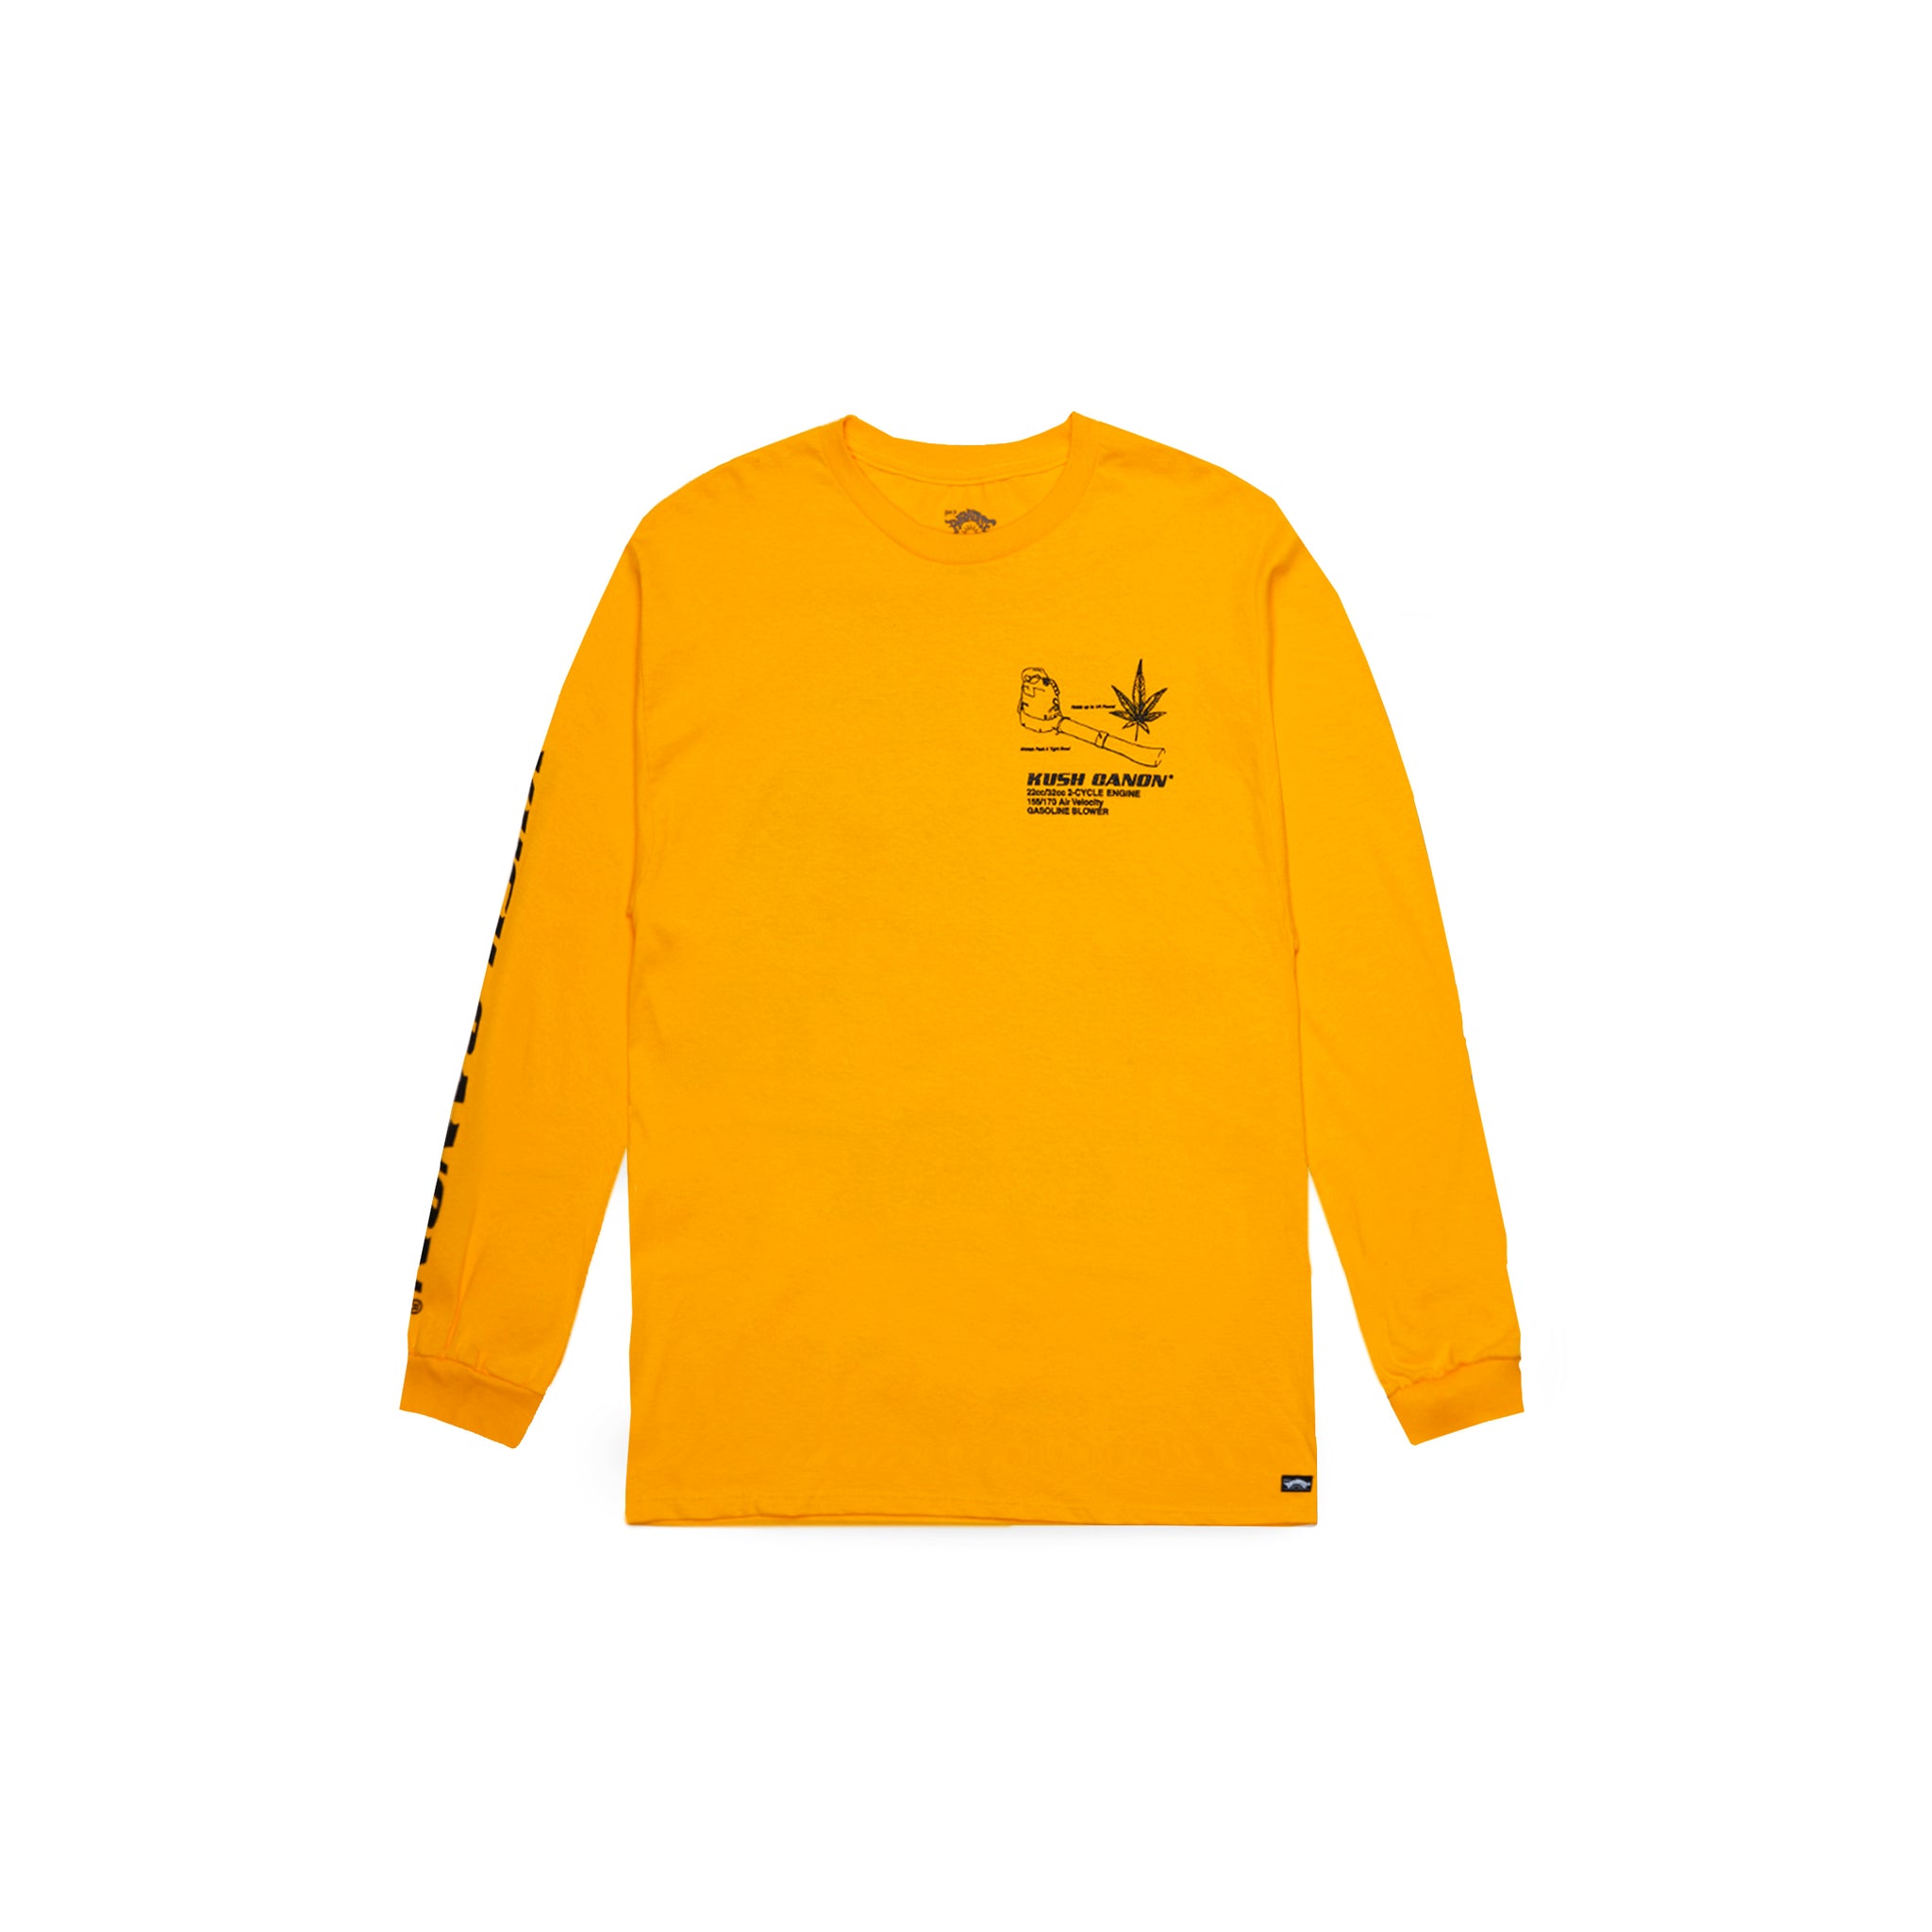 Front view of Made in Paradise World Drug Trade Collection "KUSH CANON" yellow long sleeve t-shirt